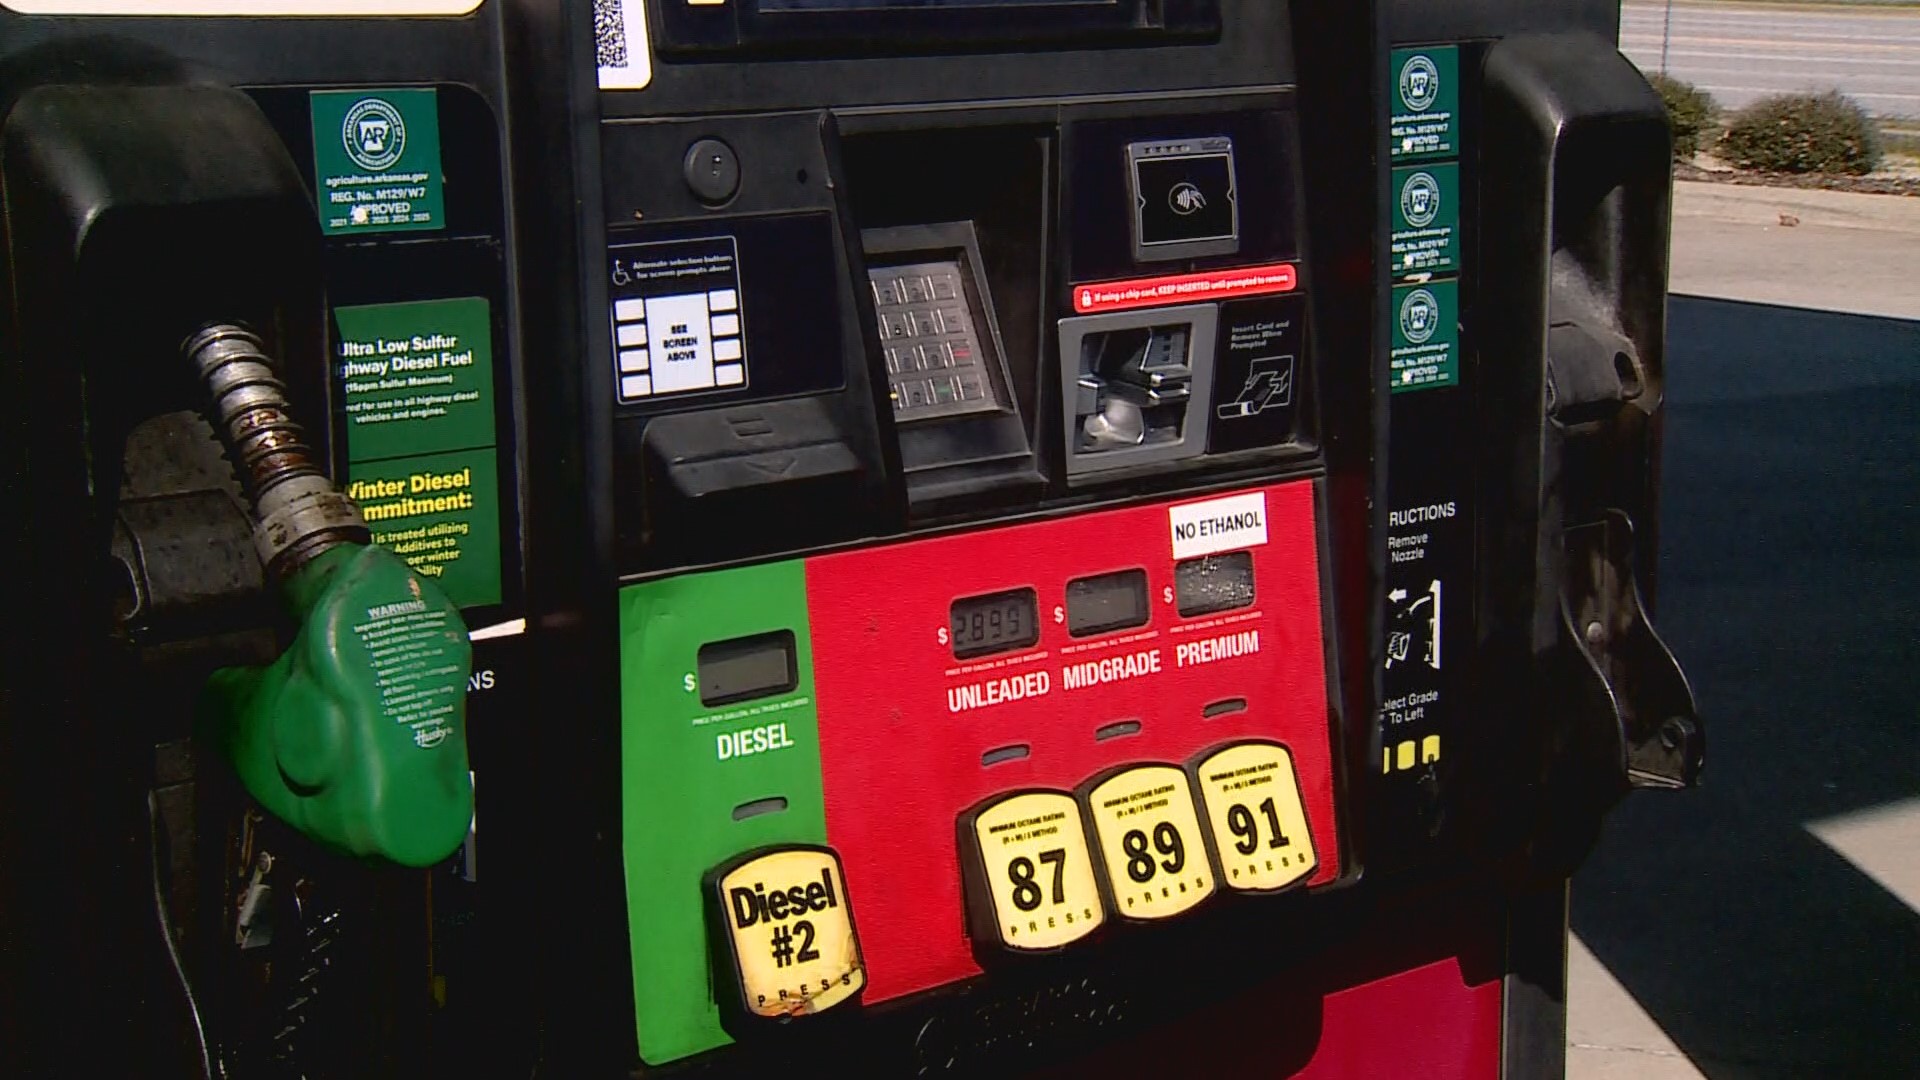 Arkansas gasoline prices have fallen 4 cents per gallon in the last week, averaging $3.17/g.